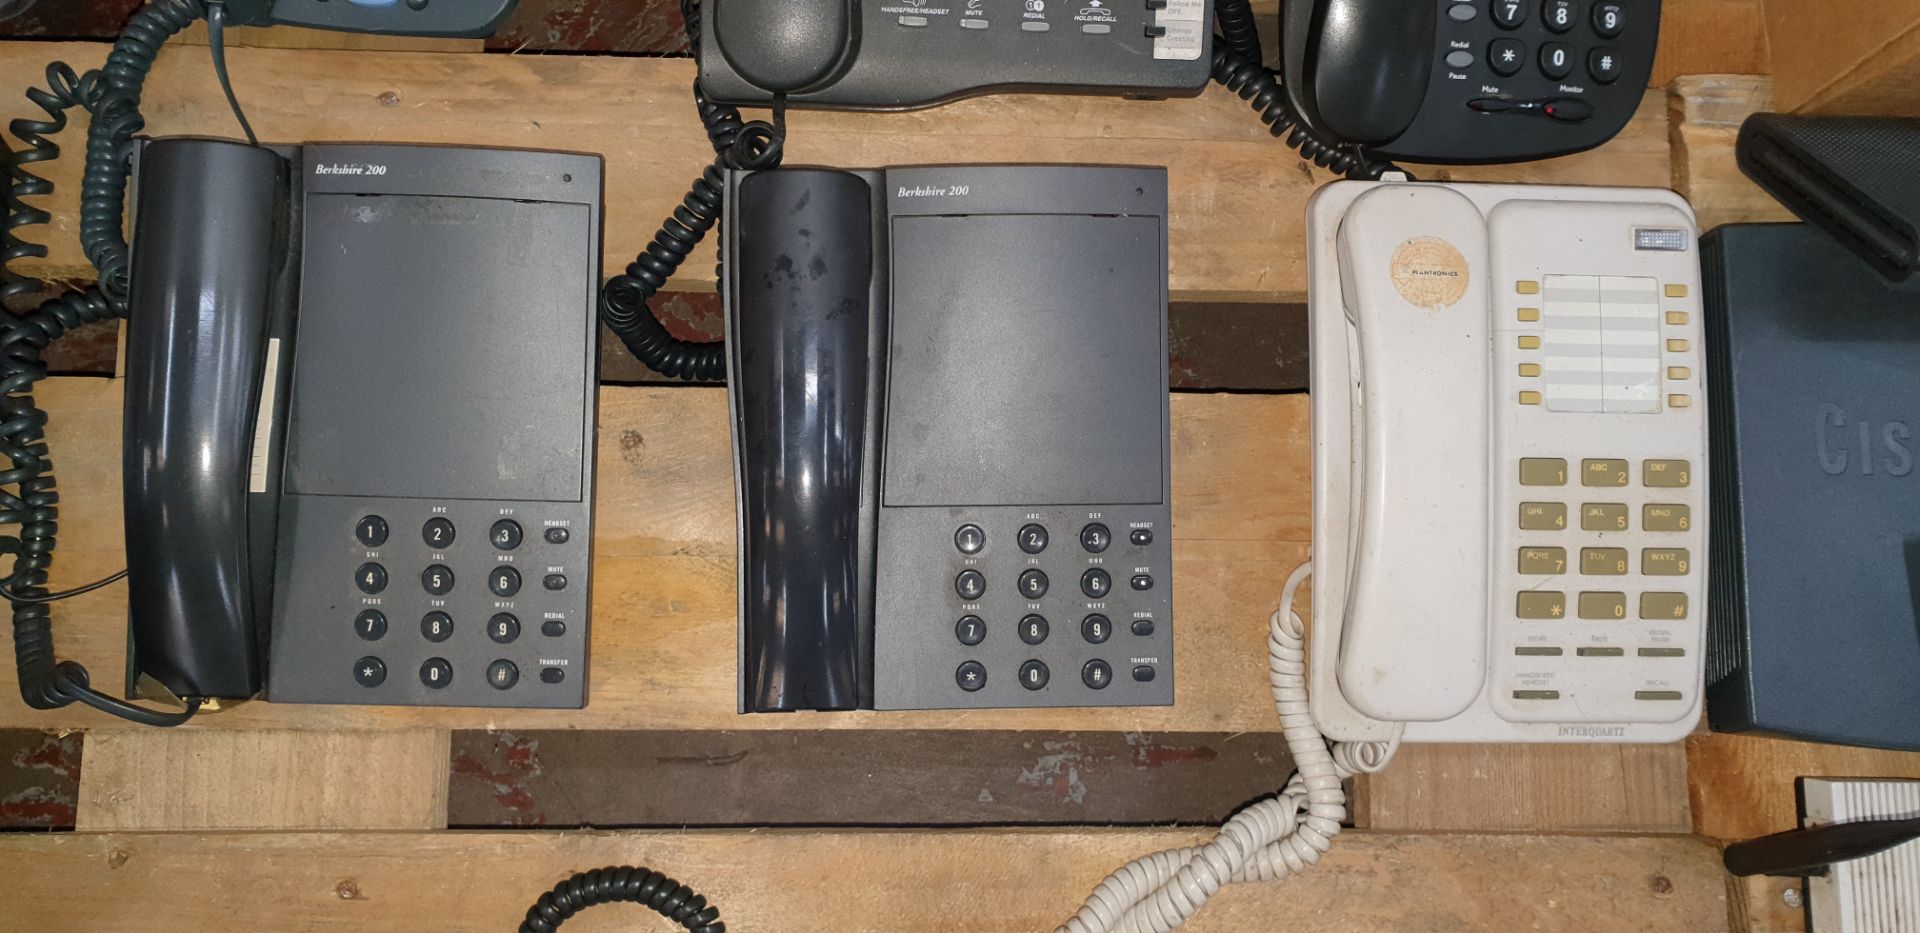 16 off assorted telephone handsets by Polycom, Cisco, Splicecom, Nortel & others - Image 7 of 8